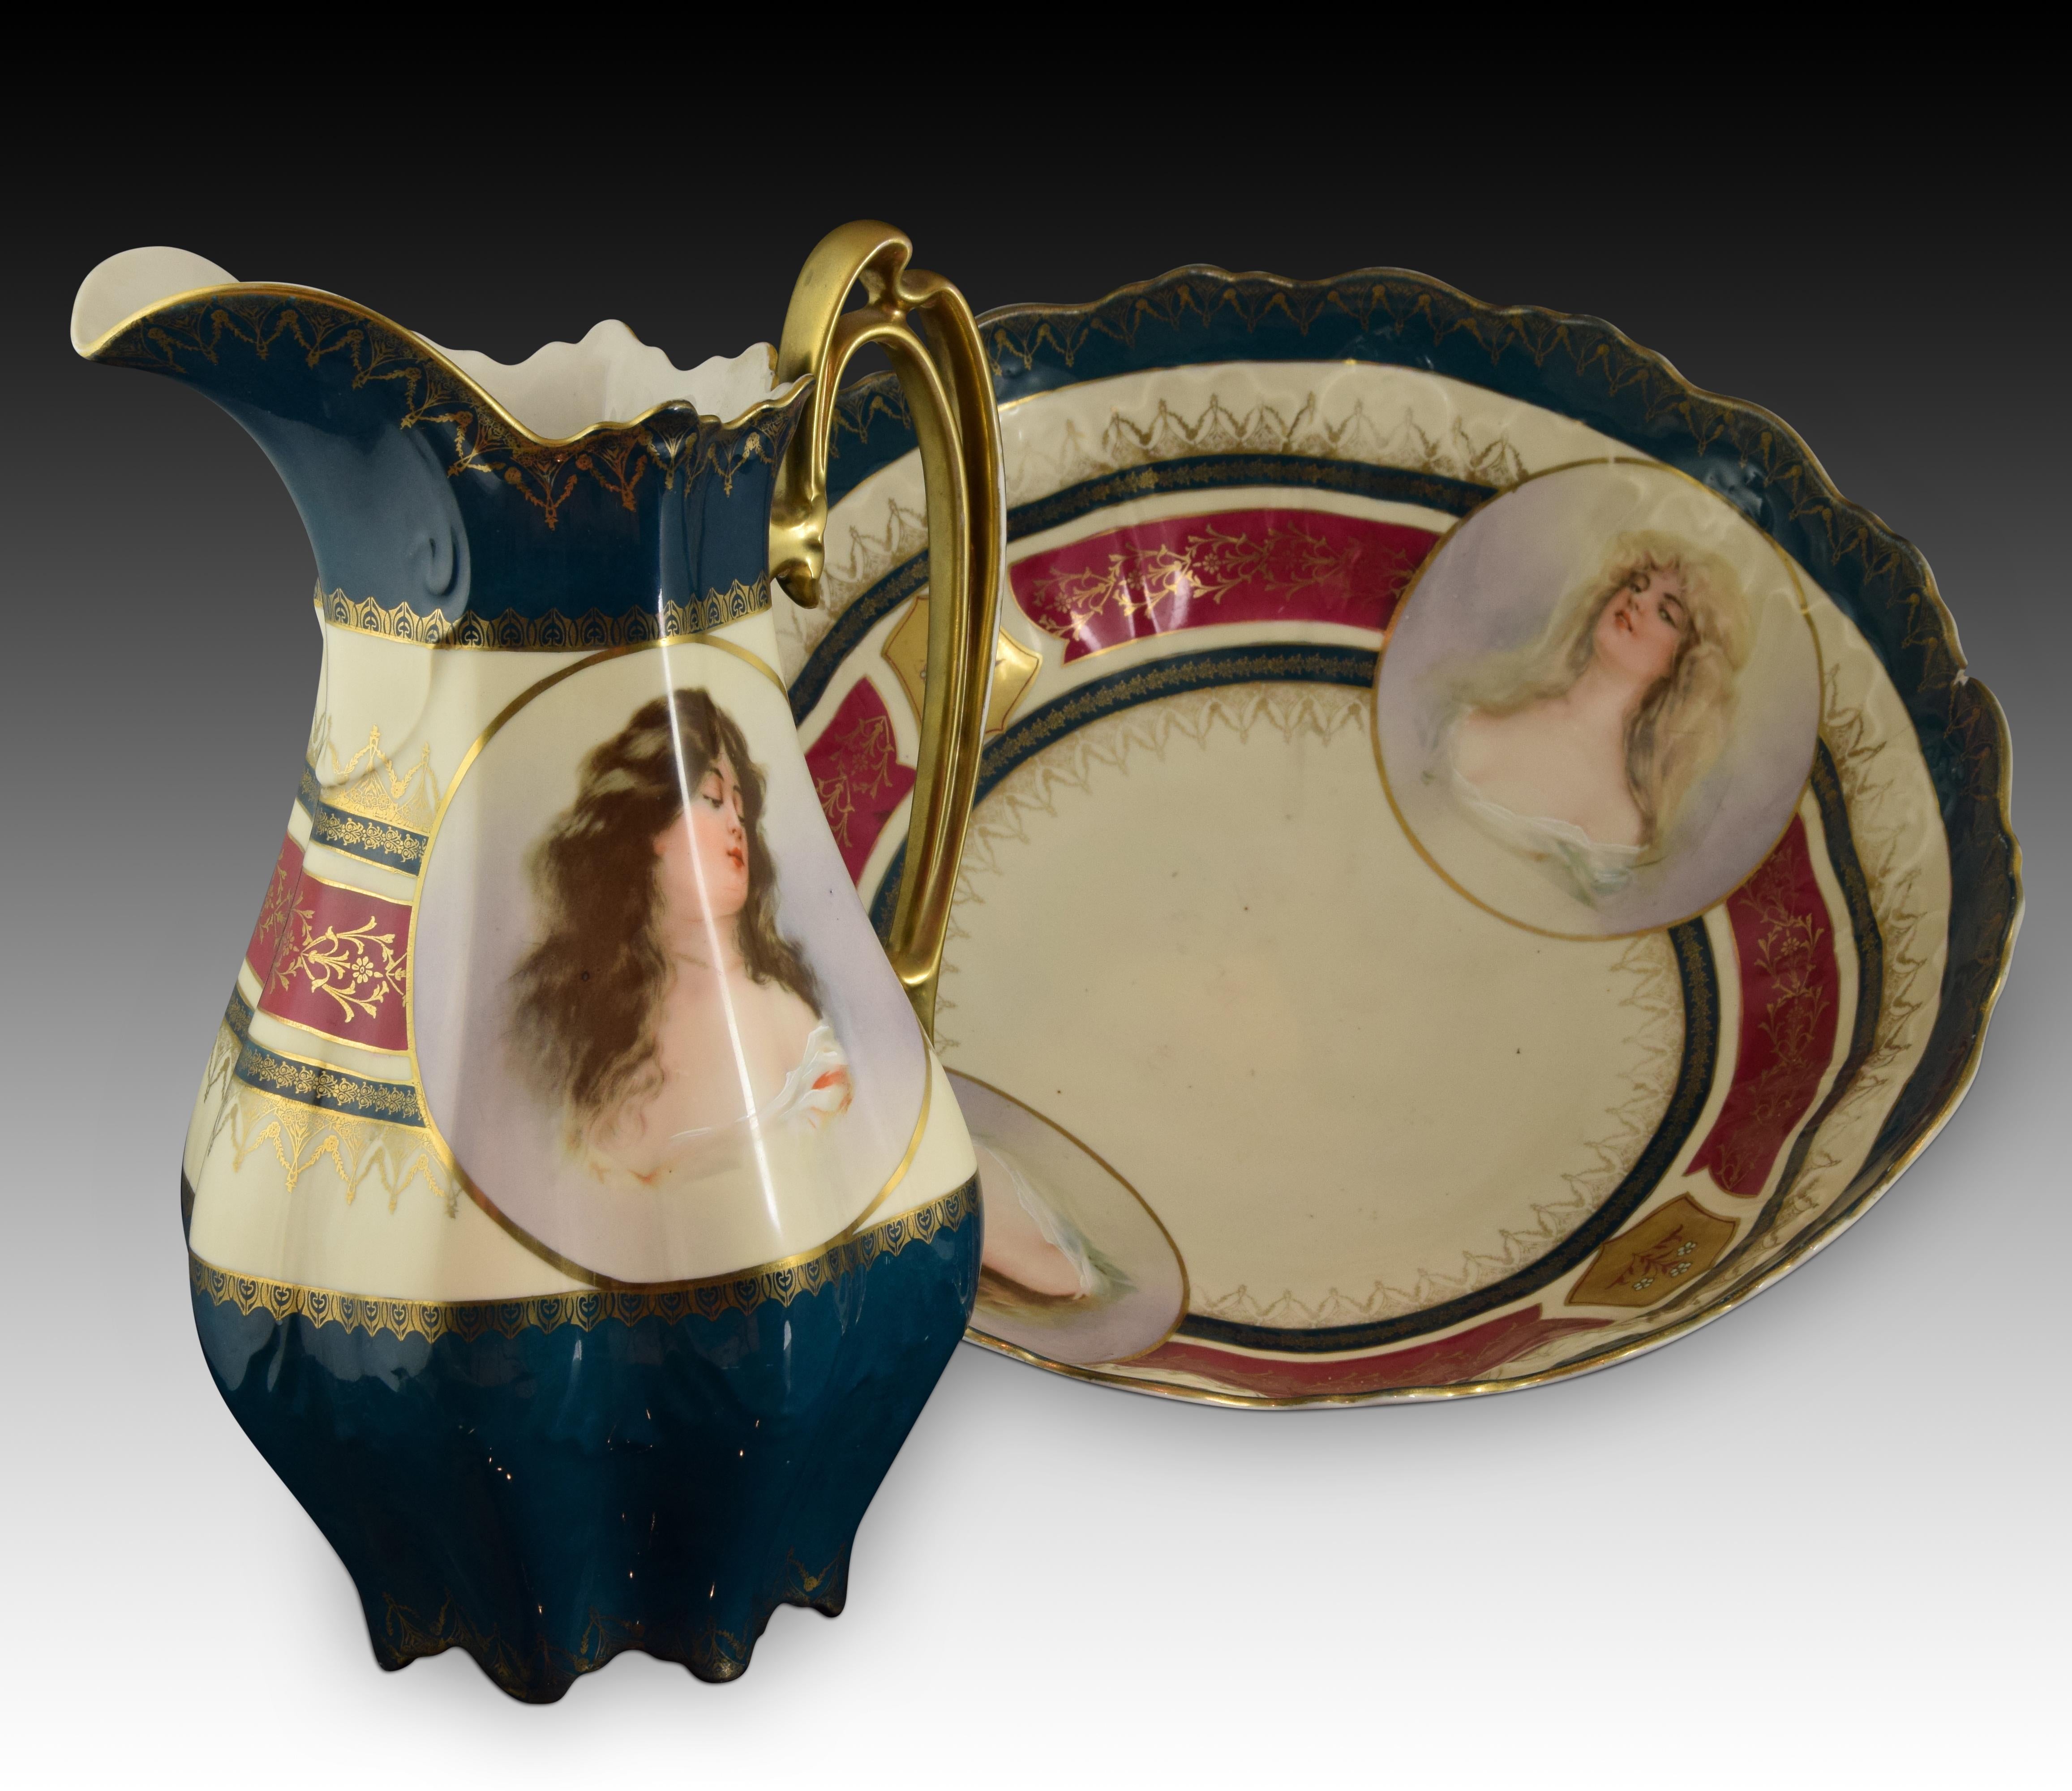 Porcelain. With marks.
Water pitcher set decorated with stripes with floral elements in floral in vivid blue, red and gold tones. The center of the ewer presents a feminine figure, present in numerous works of the factory and painted by hand, that